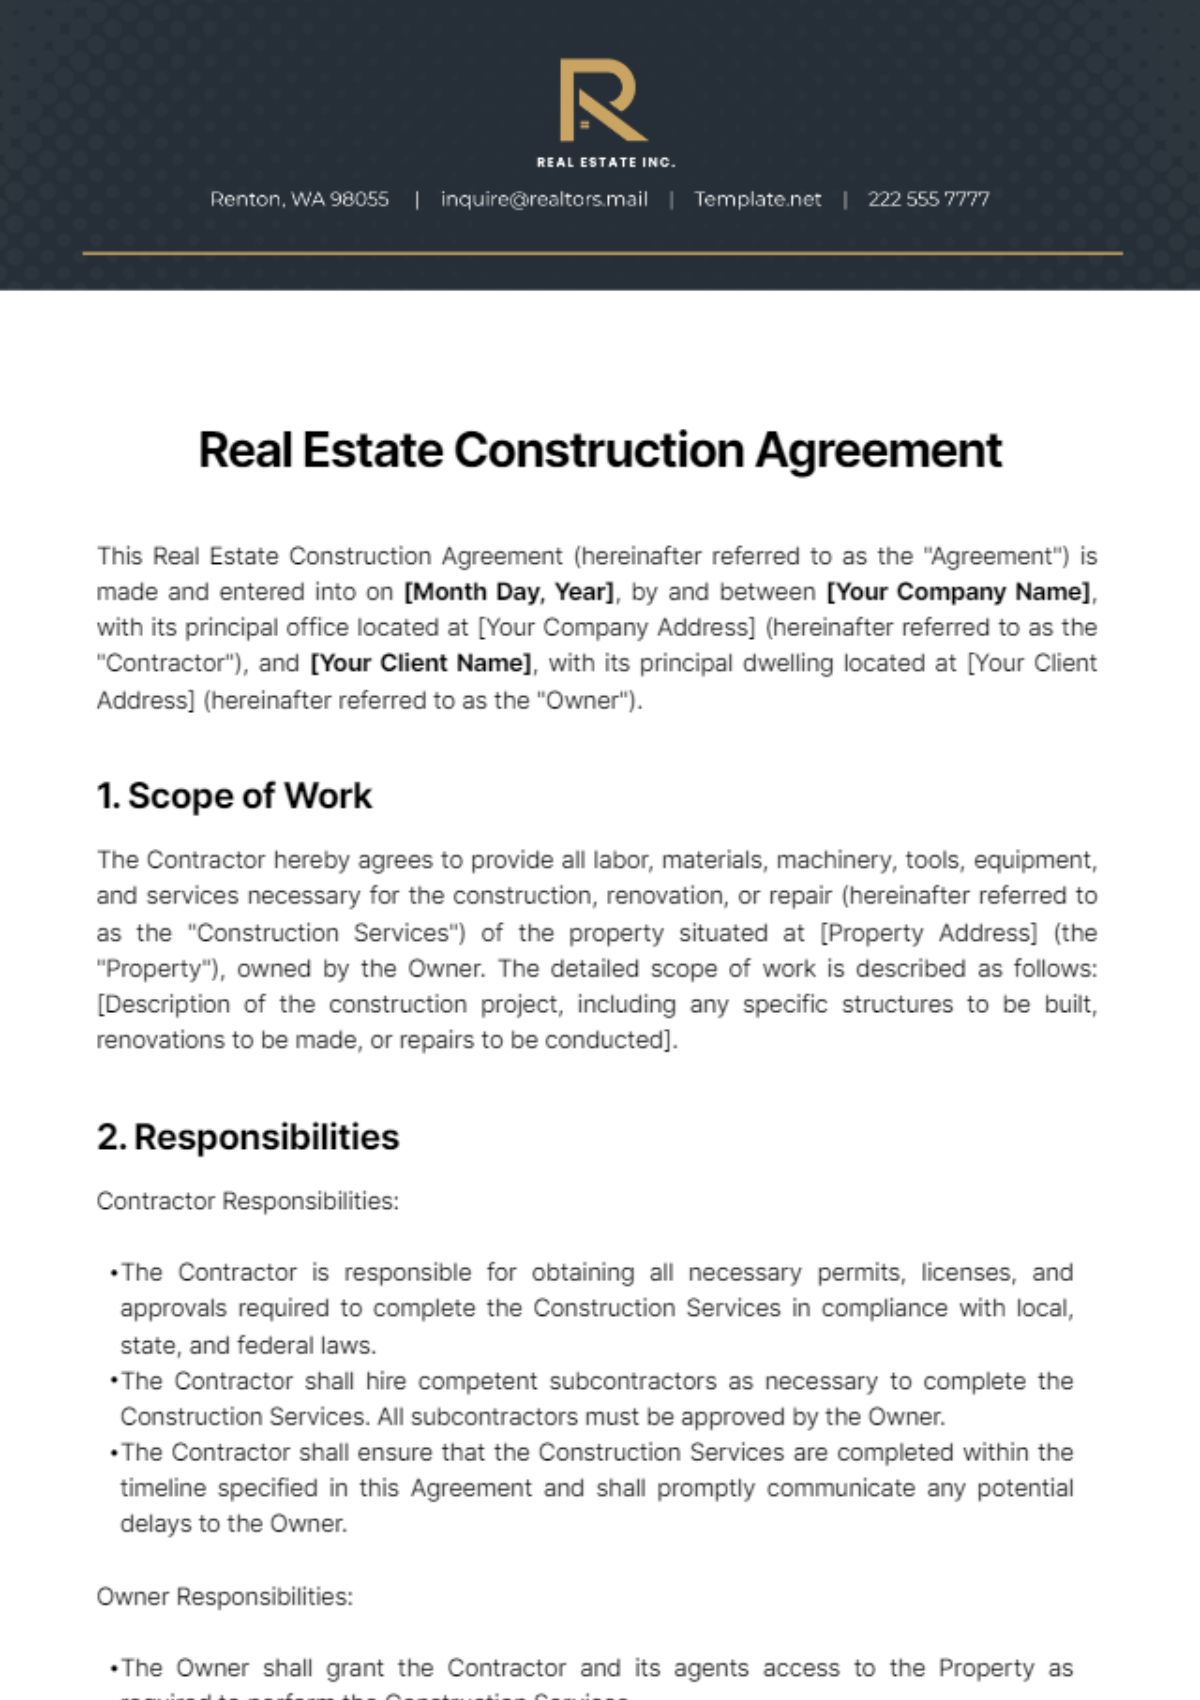 Real Estate Construction Agreement Template